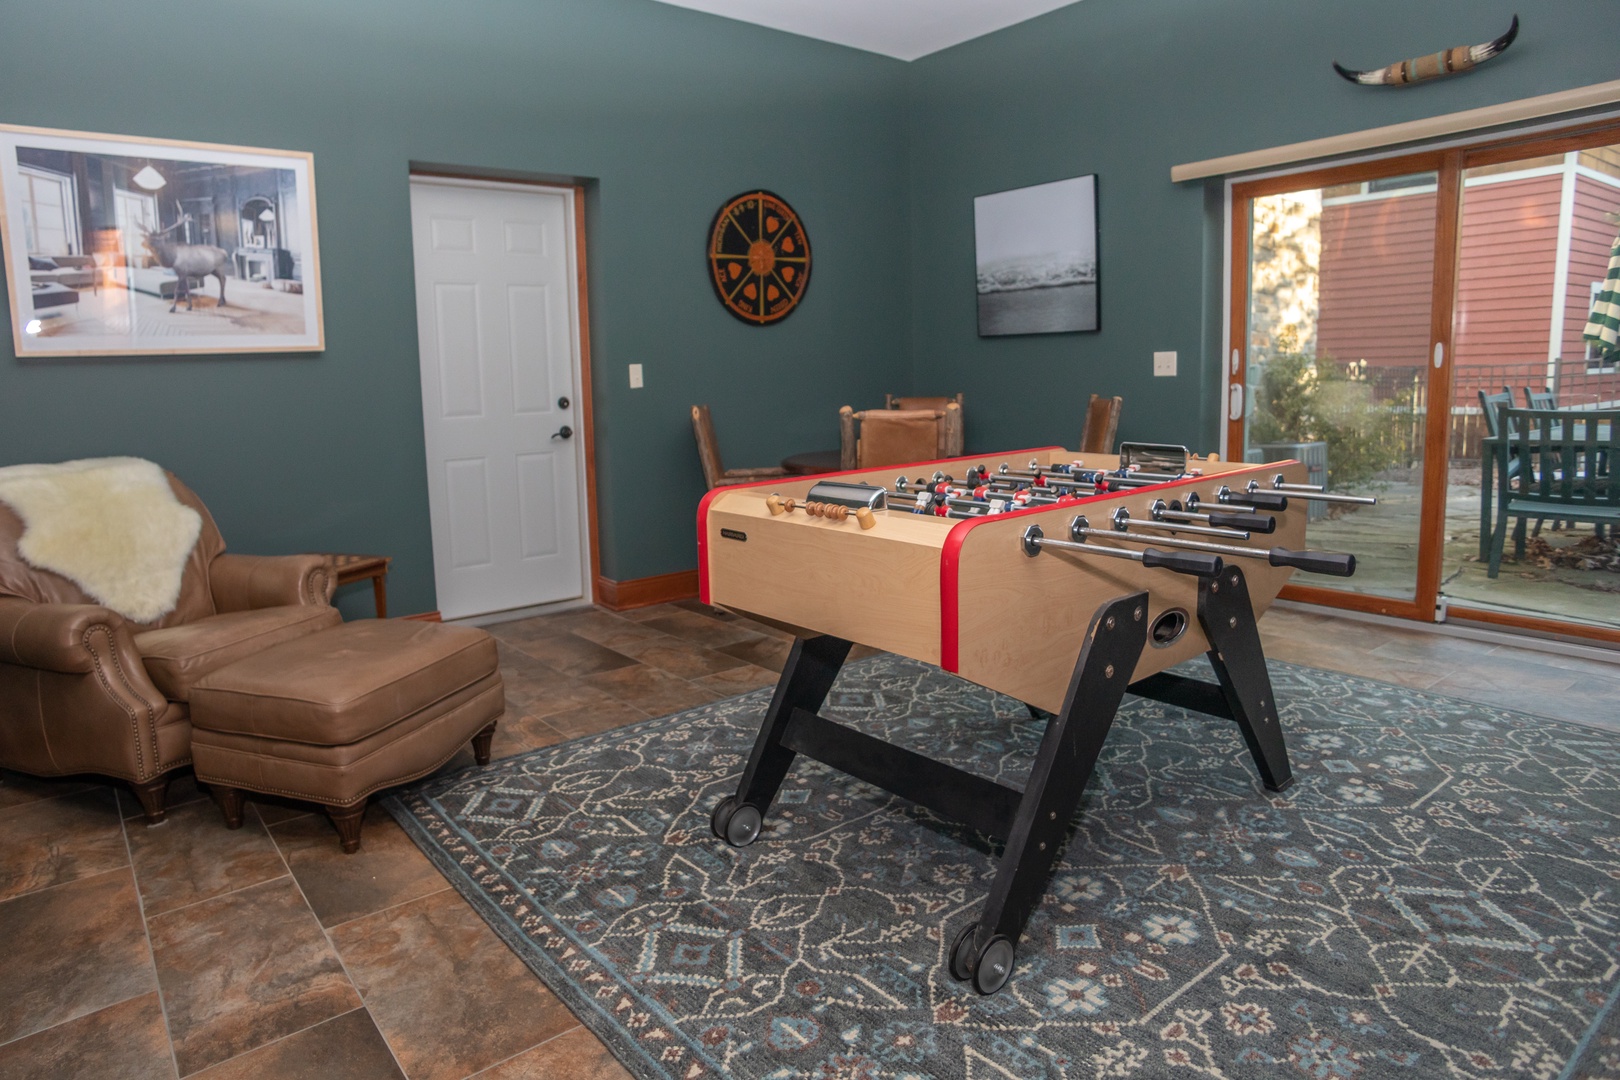 A game room with foosball table and other activities provides entertainment for everyone.